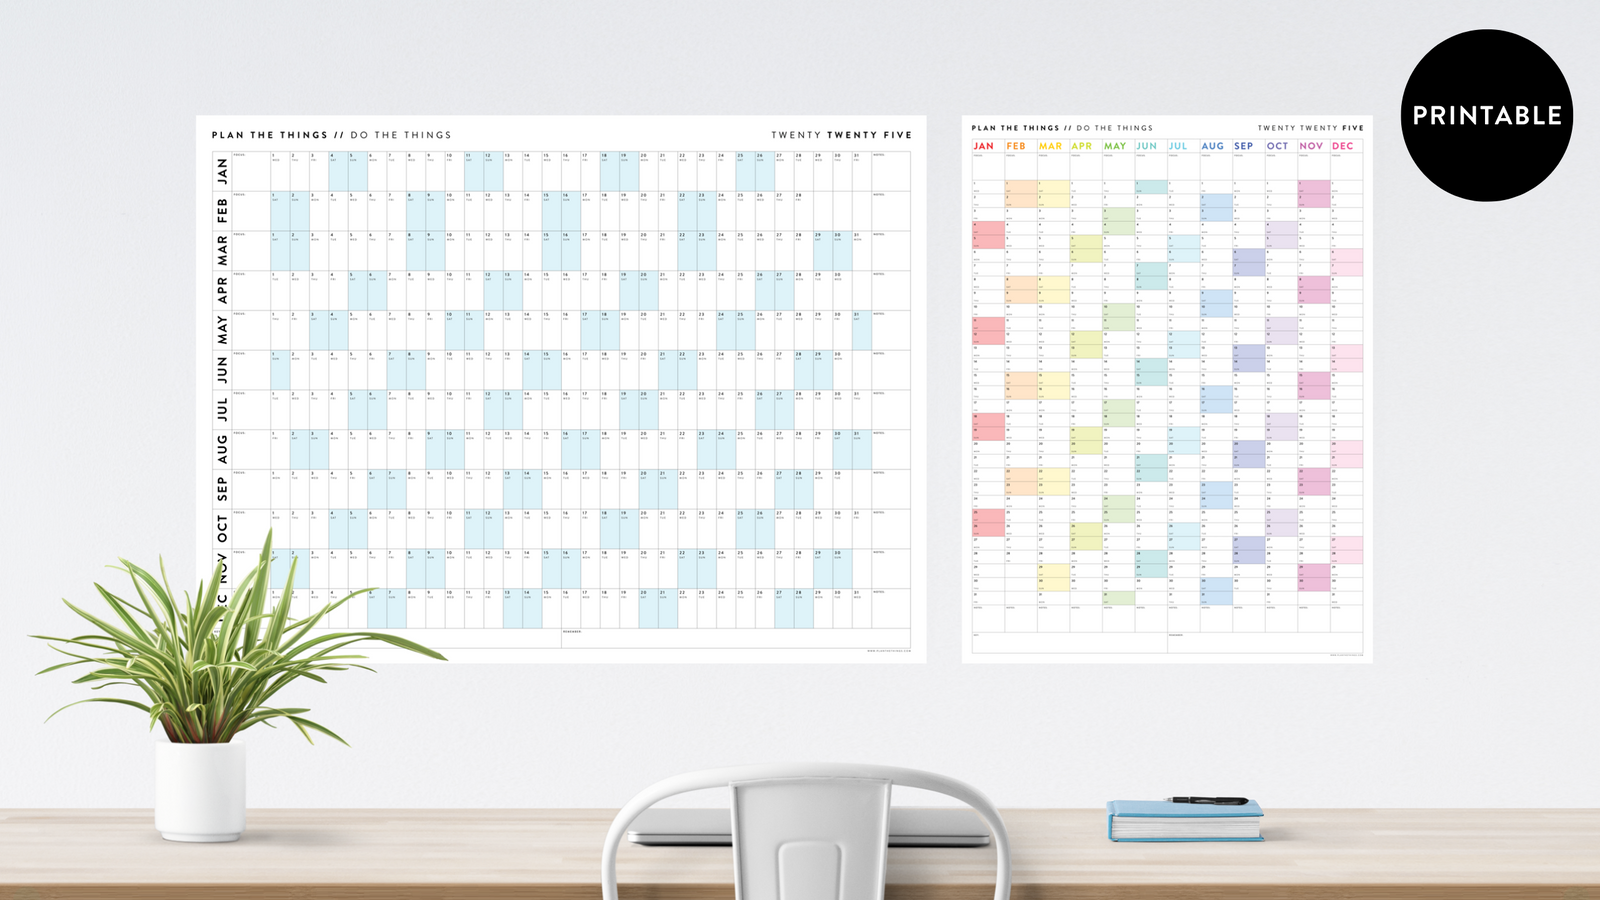 PRINTABLE 2025 ANNUAL CALENDARS // INSTANT DOWNLOAD - Plan The Things